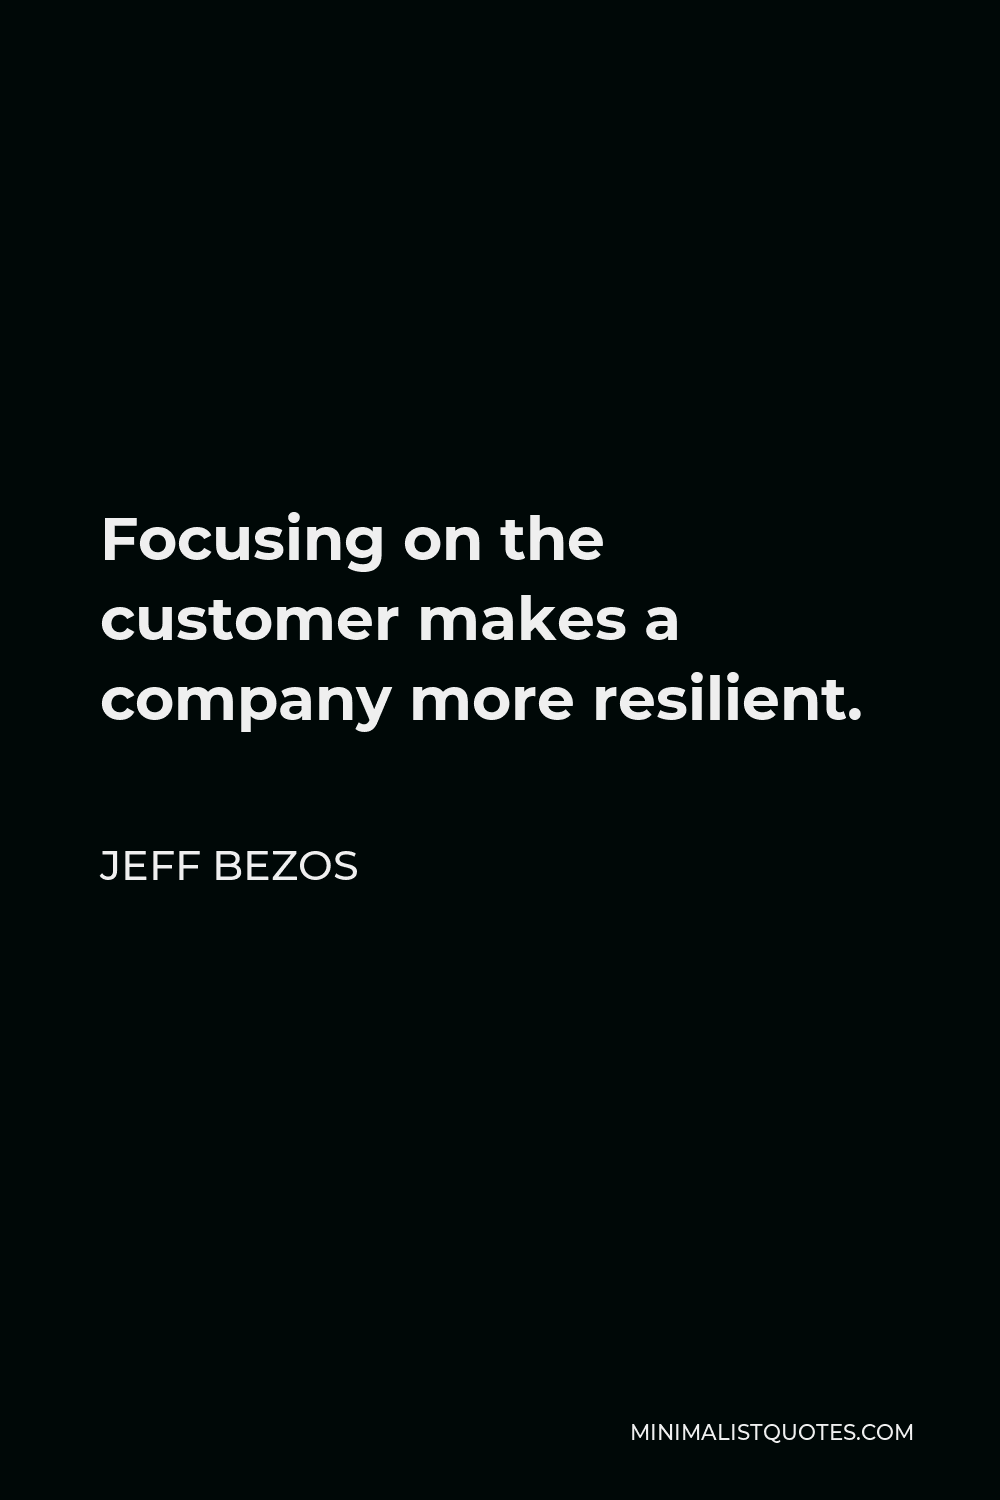 Jeff Bezos Quote - Focusing on the customer makes a company more resilient.